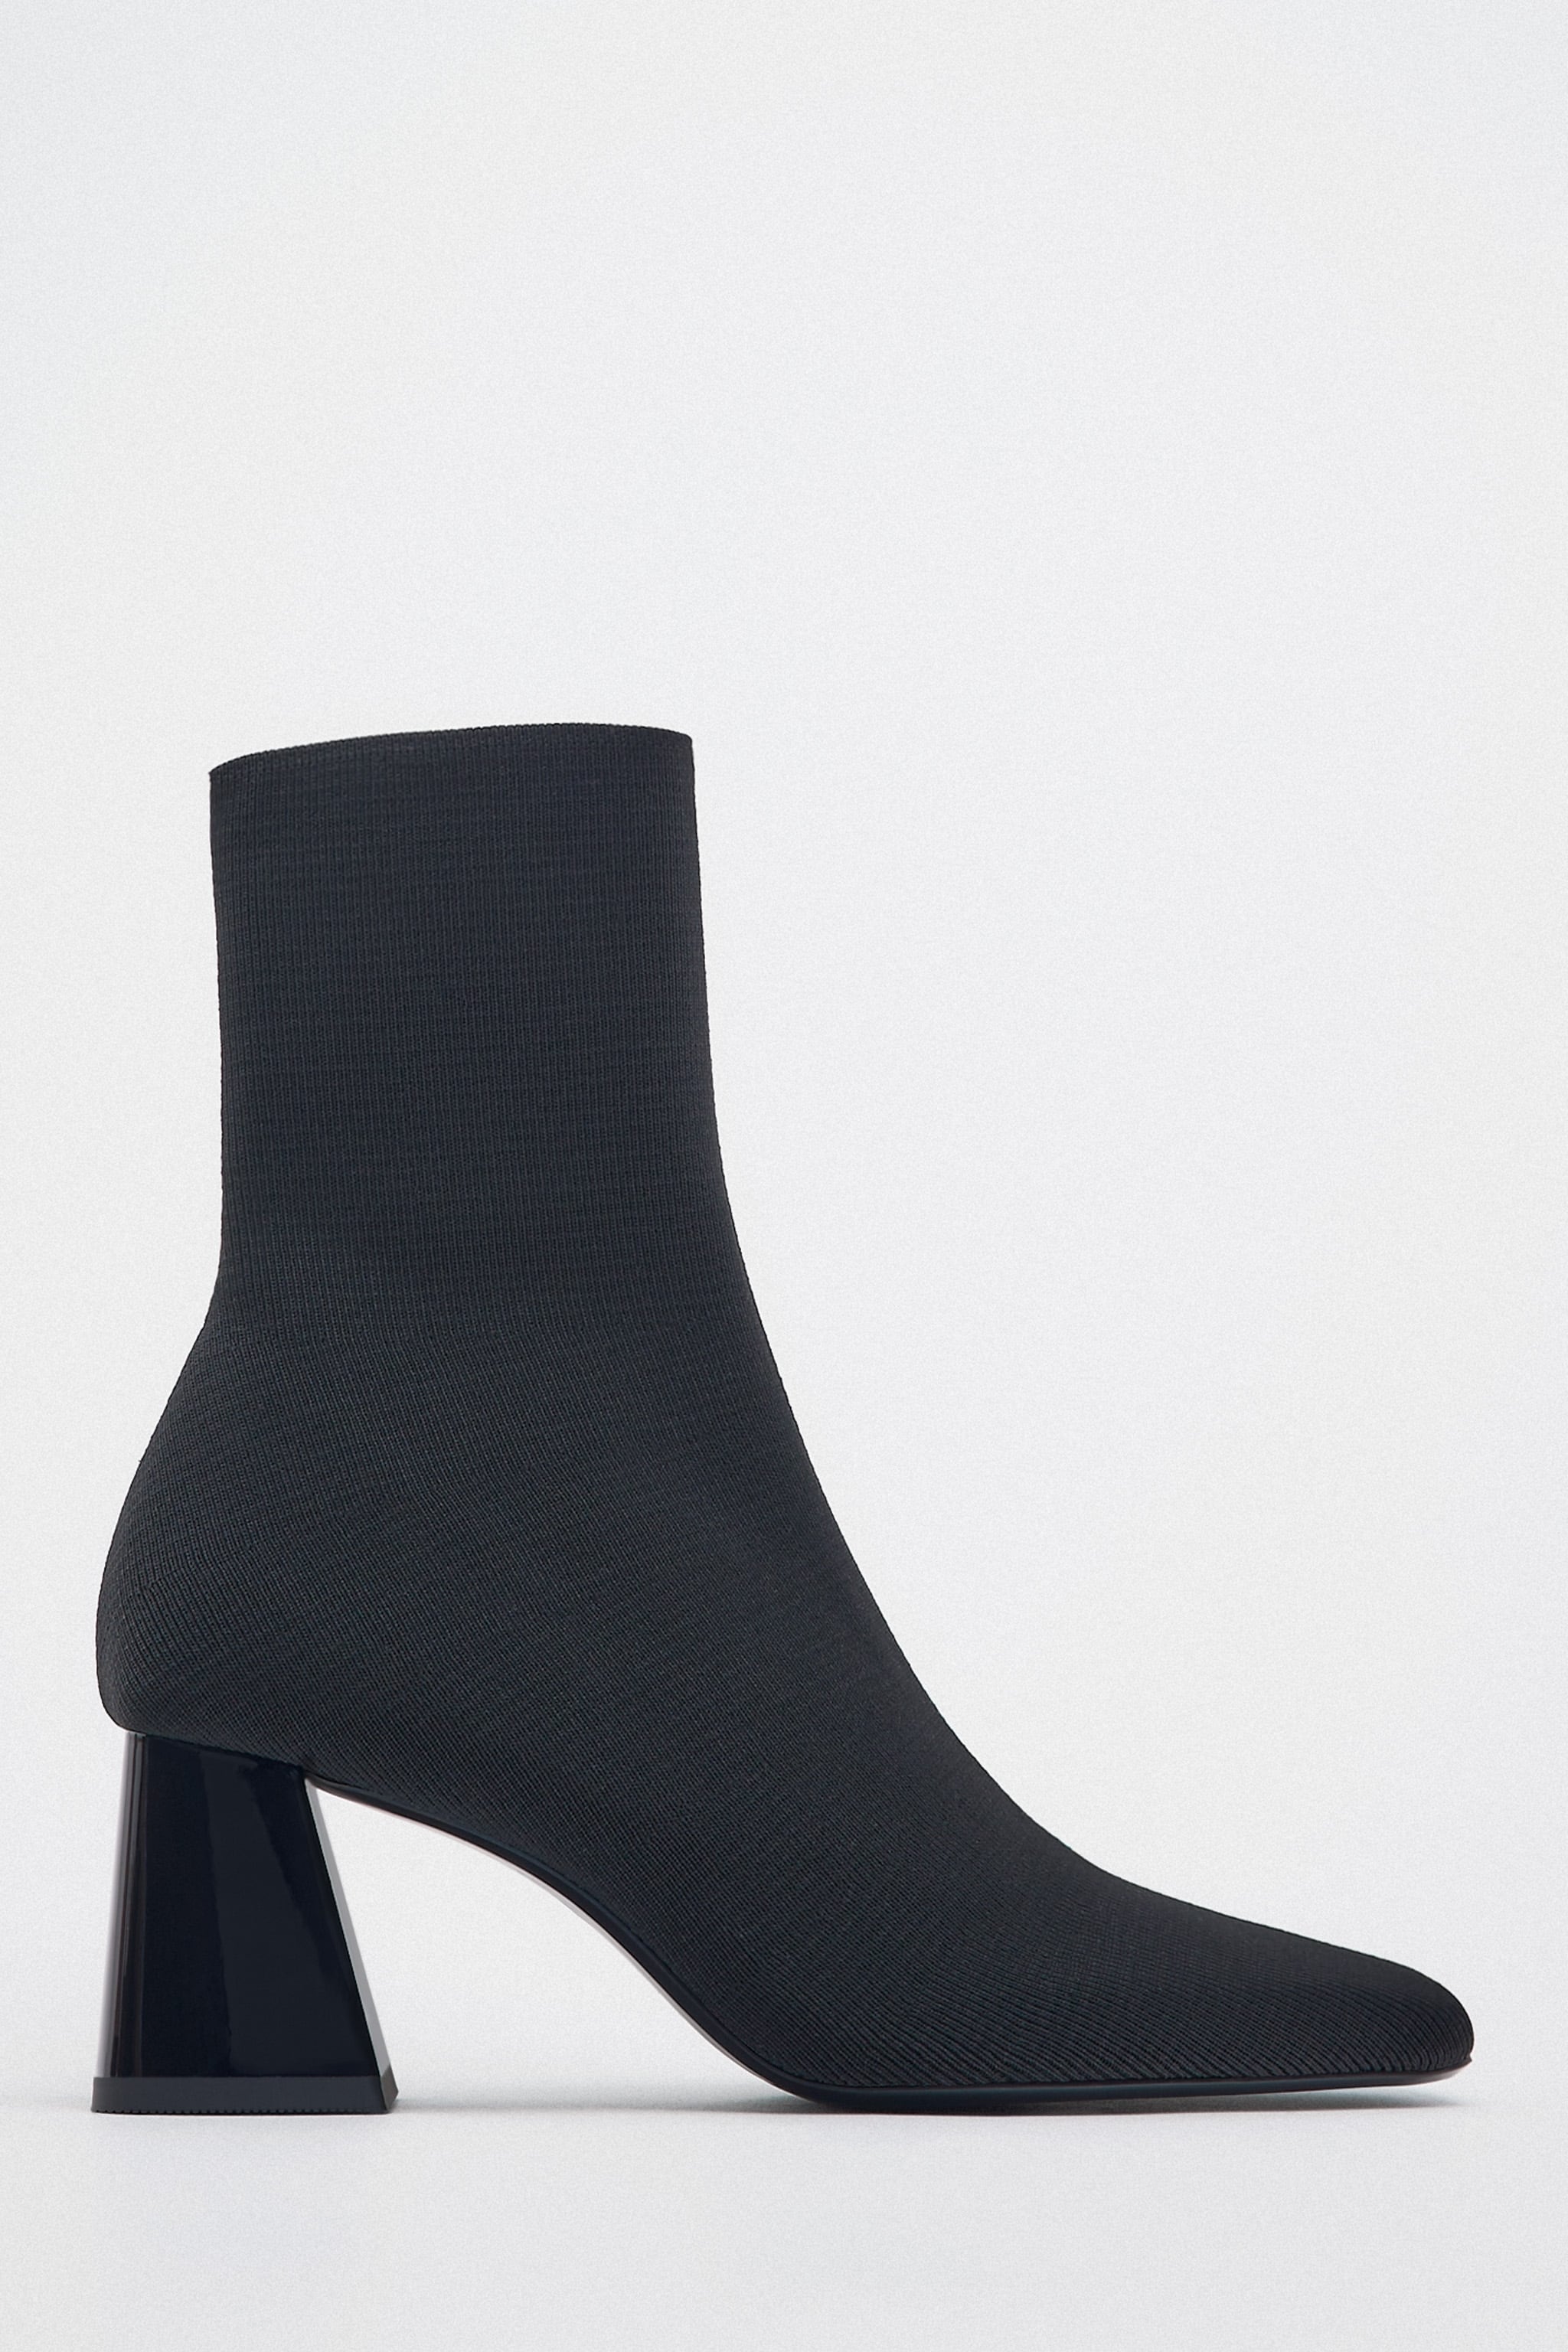 BLOCK HEEL FABRIC ANKLE BOOTS